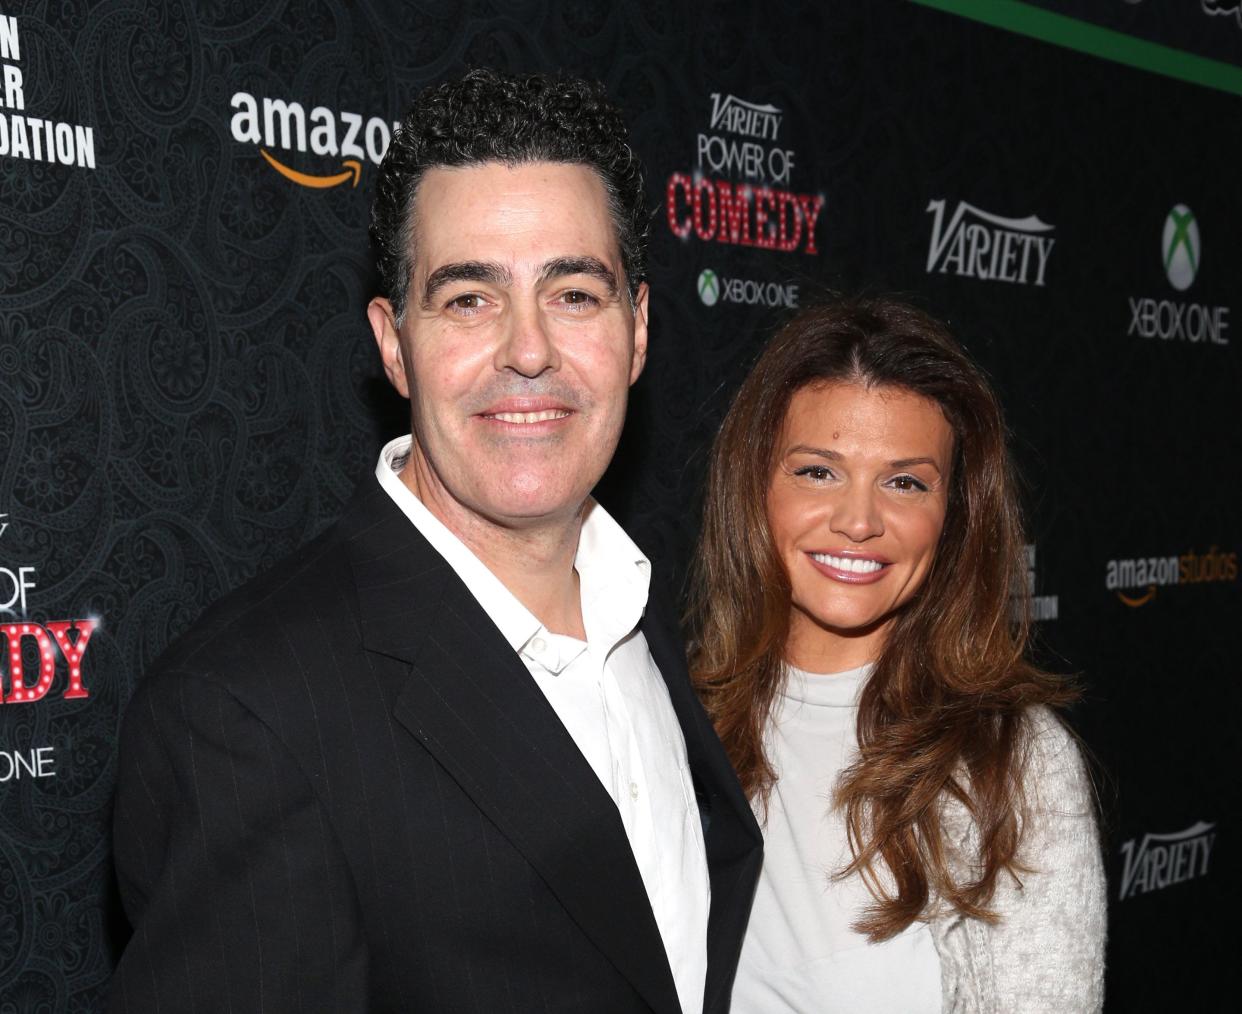 Comedian Adam Carolla and Lynette Paradise attend Variety's 4th Annual Power of Comedy presented by Xbox One benefiting the Noreen Fraser Foundation at Avalon on November 16, 2013 in Hollywood, California. 